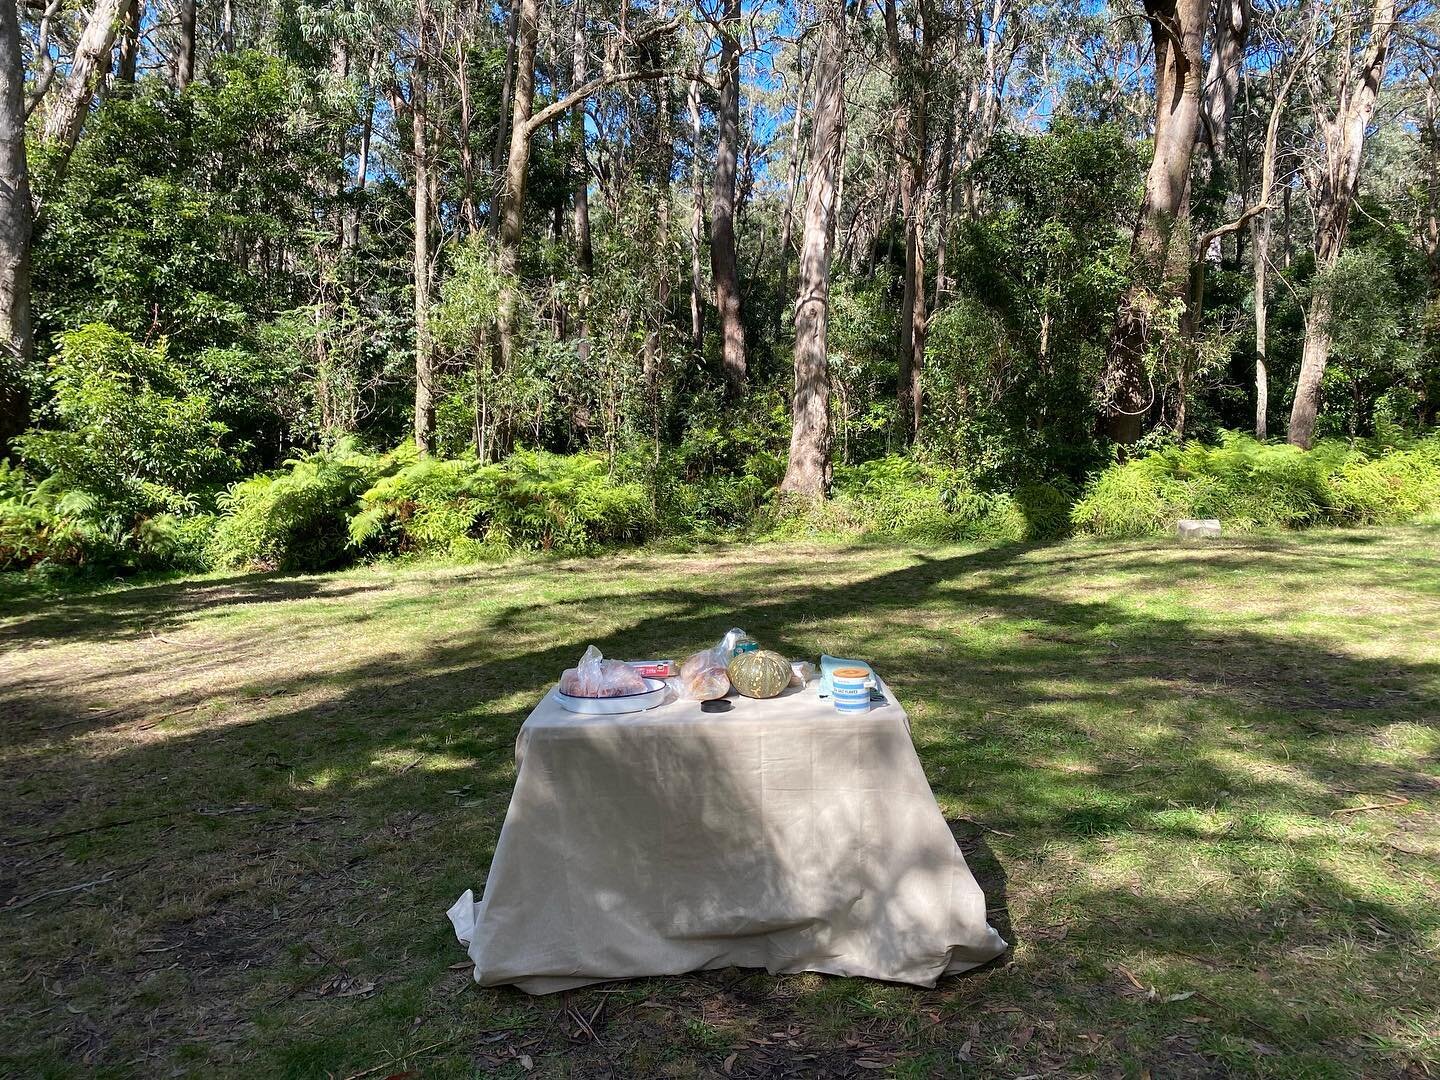 🎥 Regional Explorer Foundation Series coming soon to YouTube 

First up;
Camp fires 101
Camp fire easy favourites
Camp fire beginner fire cooking 

#exploremore @visitnsw 
#camping #campingaustralia 
#firecooking